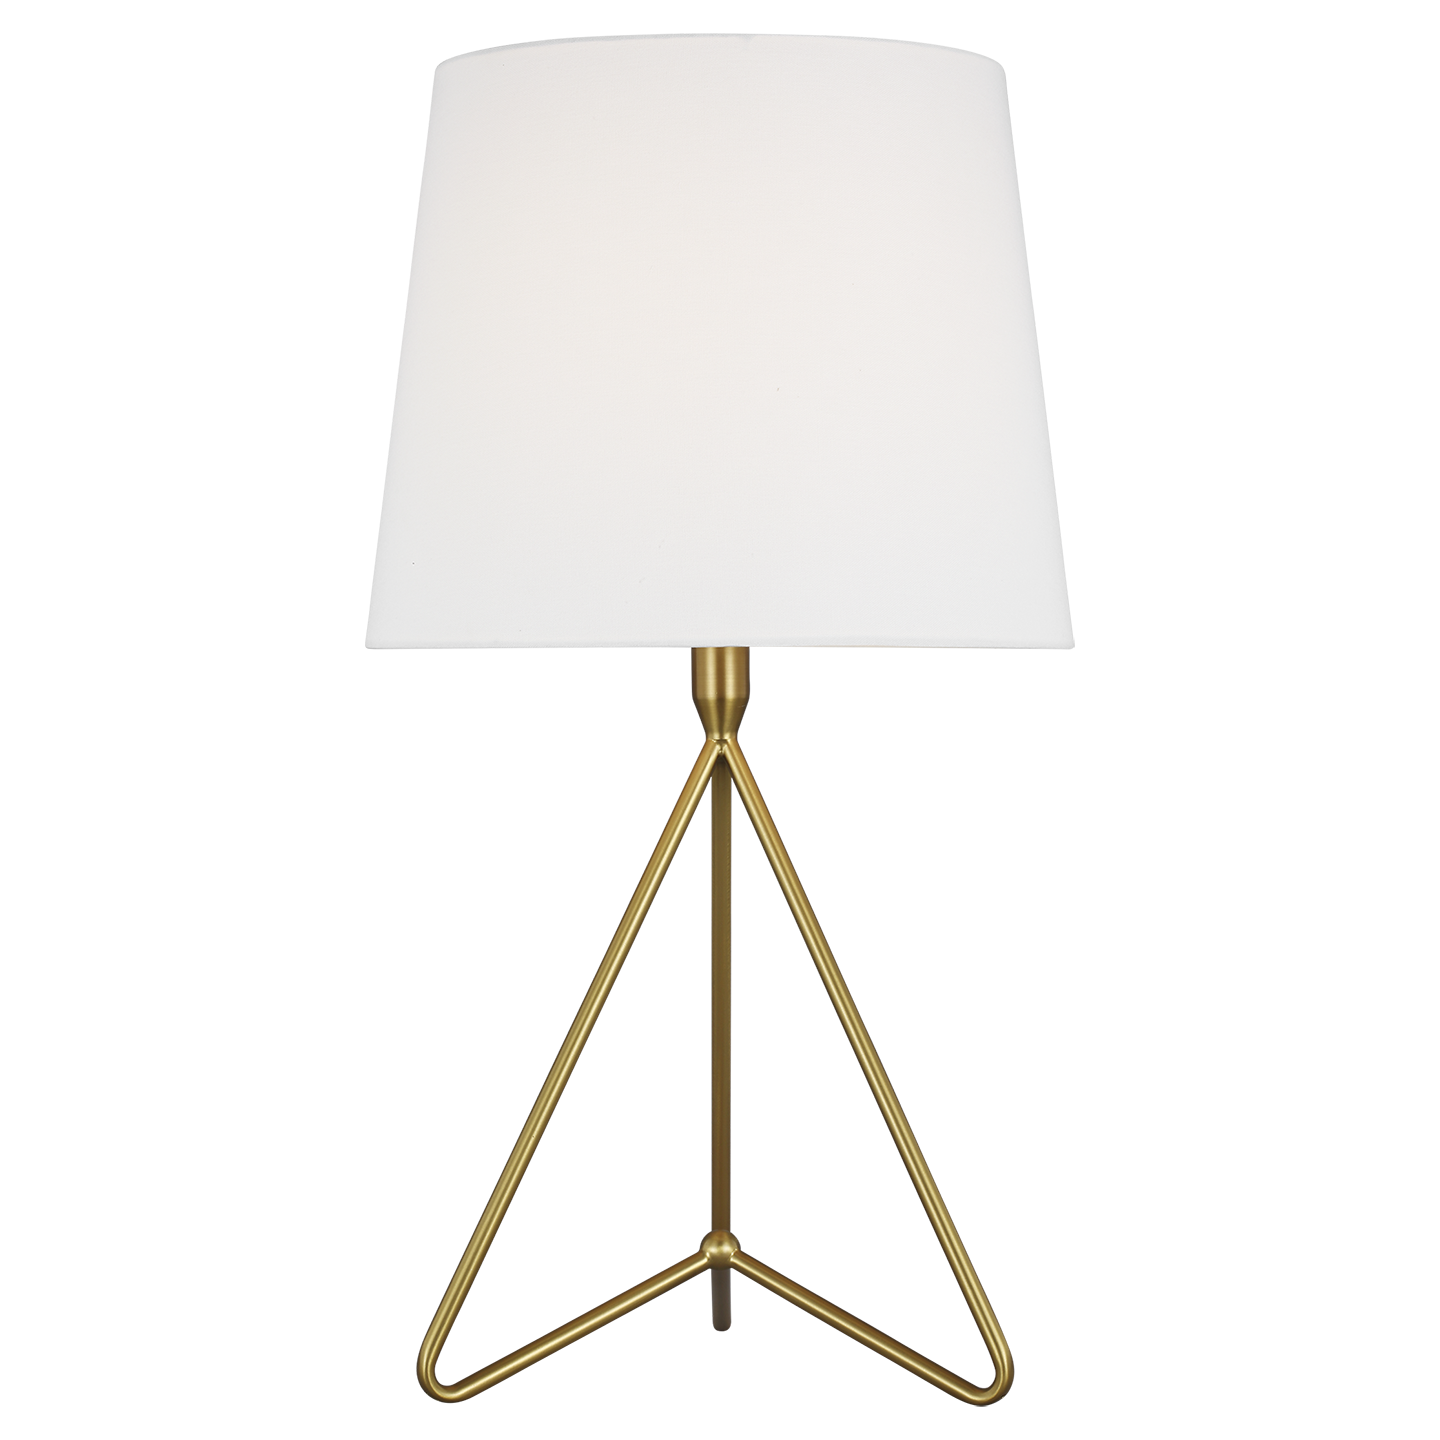 Dylan Tall Table Lamp